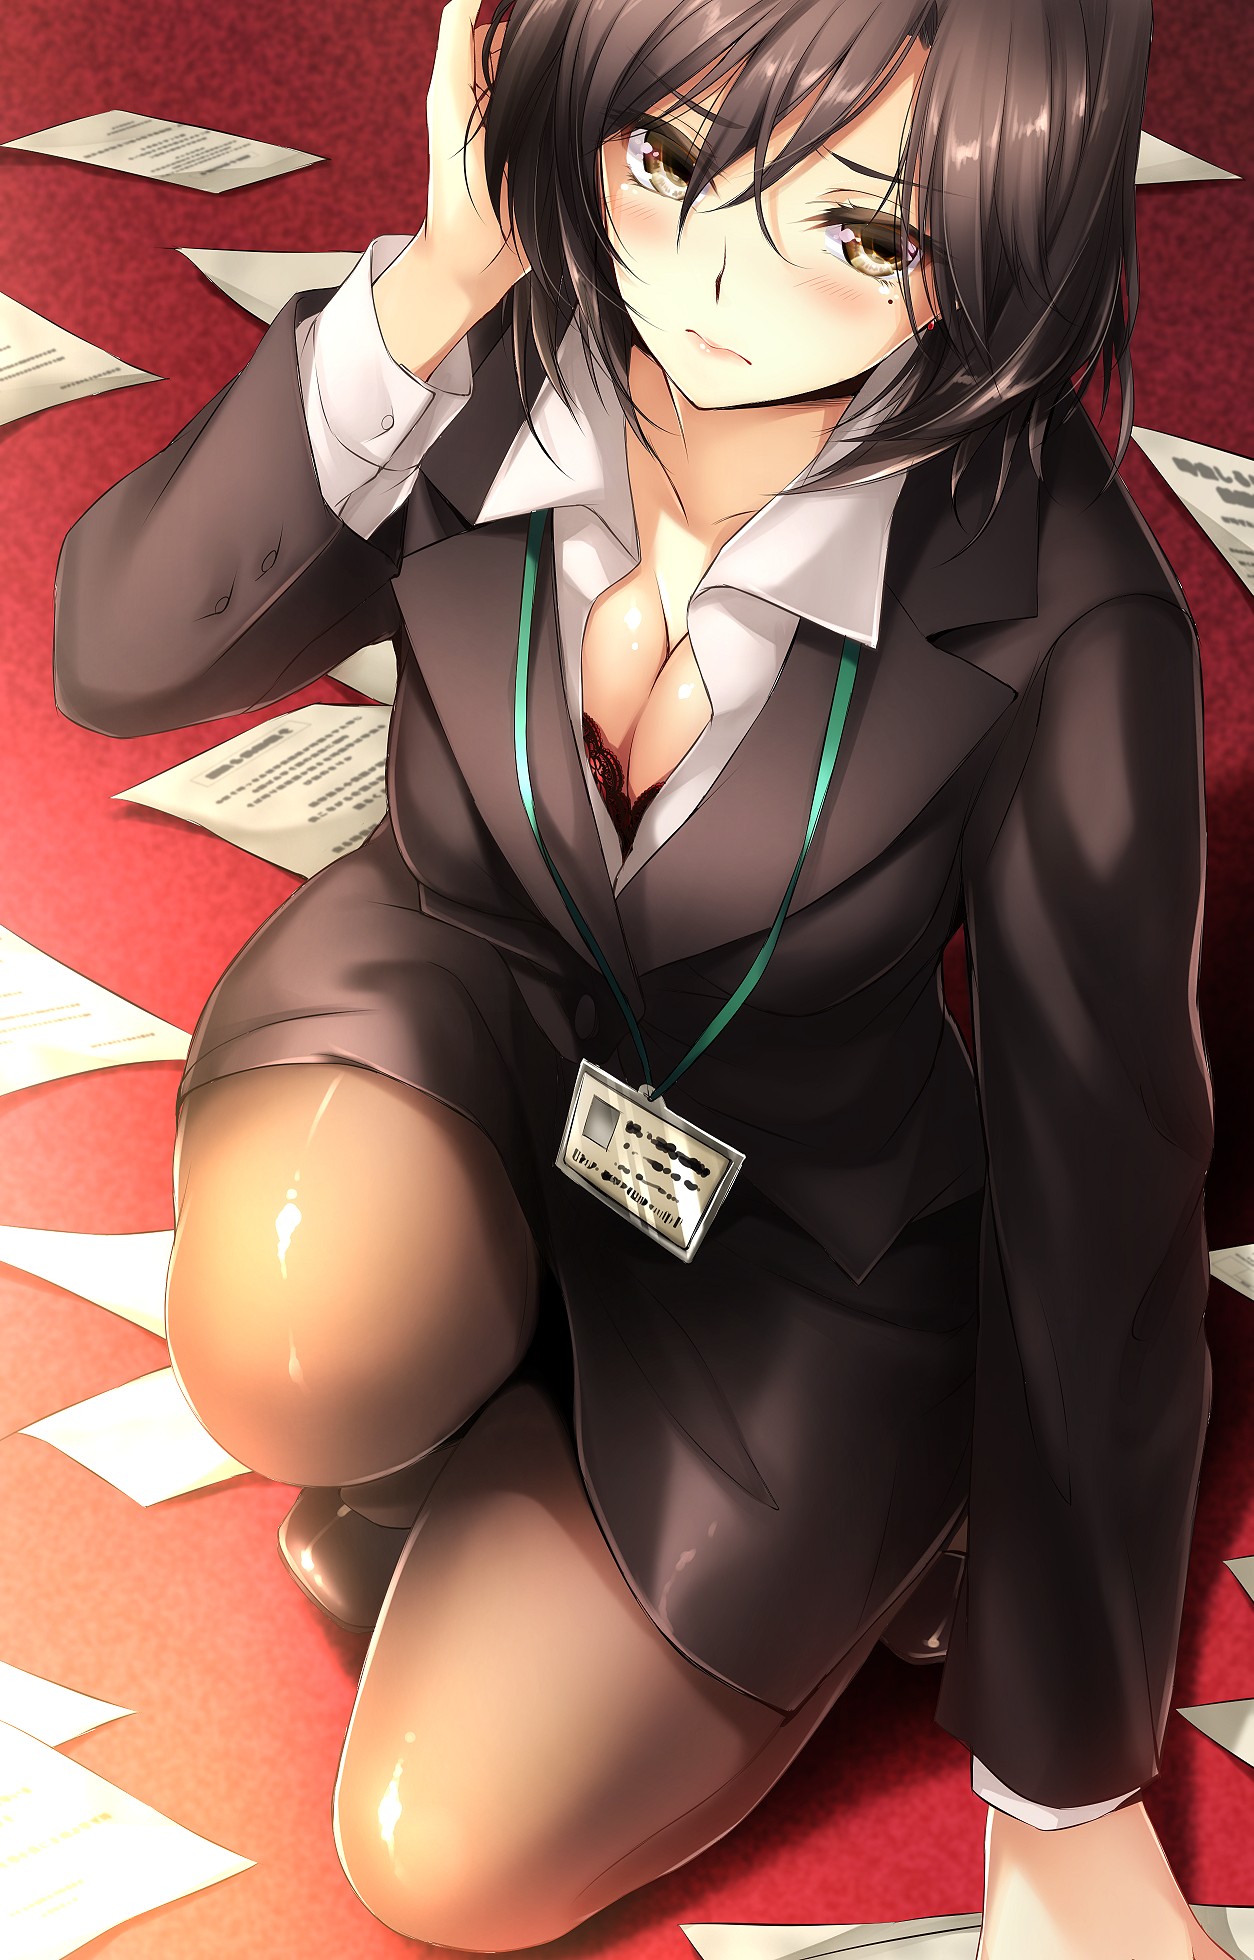 Anime 1254x1960 anime anime girls bra business suit cleavage short hair brunette brown eyes open shirt pantyhose suits blushing Gute-nacht-07